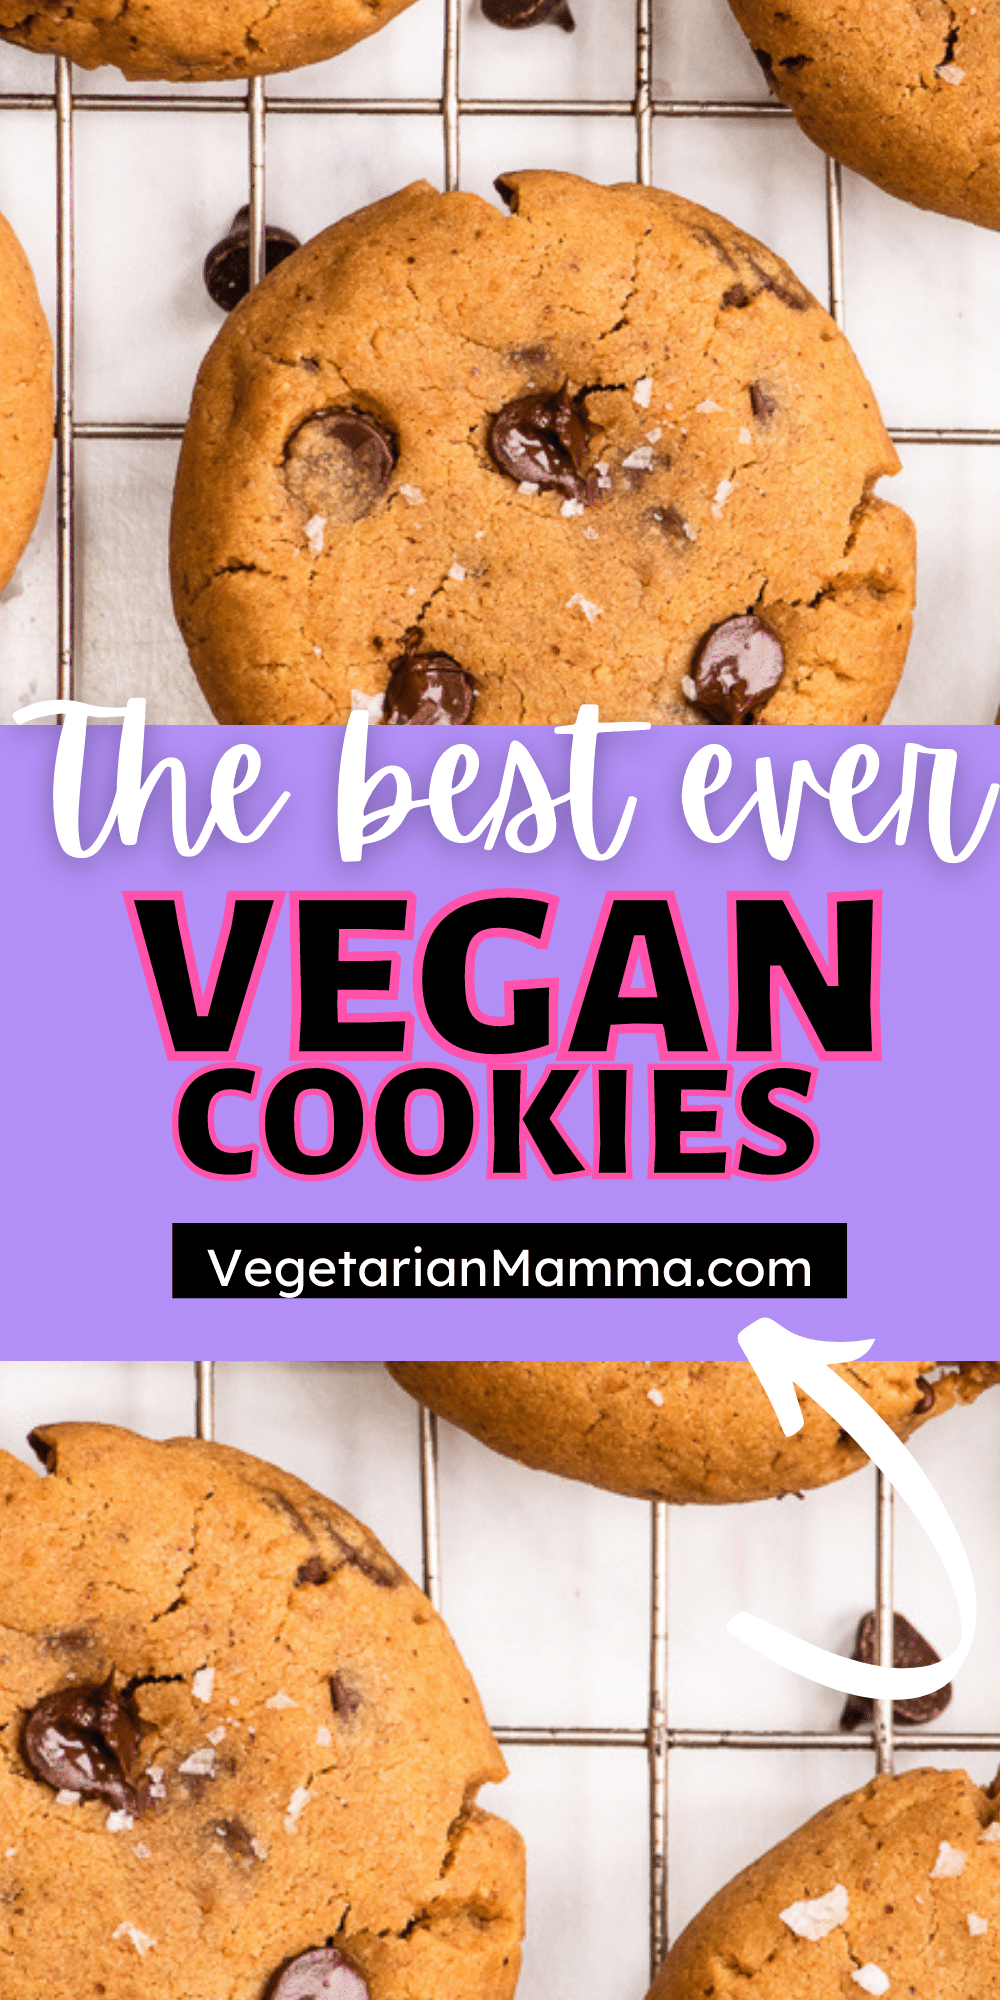 Vegan Peanut Butter Chocolate Chip Cookies are chewy, soft, and packed with chocolate! These are truly the best gluten-free cookies you'll ever make.